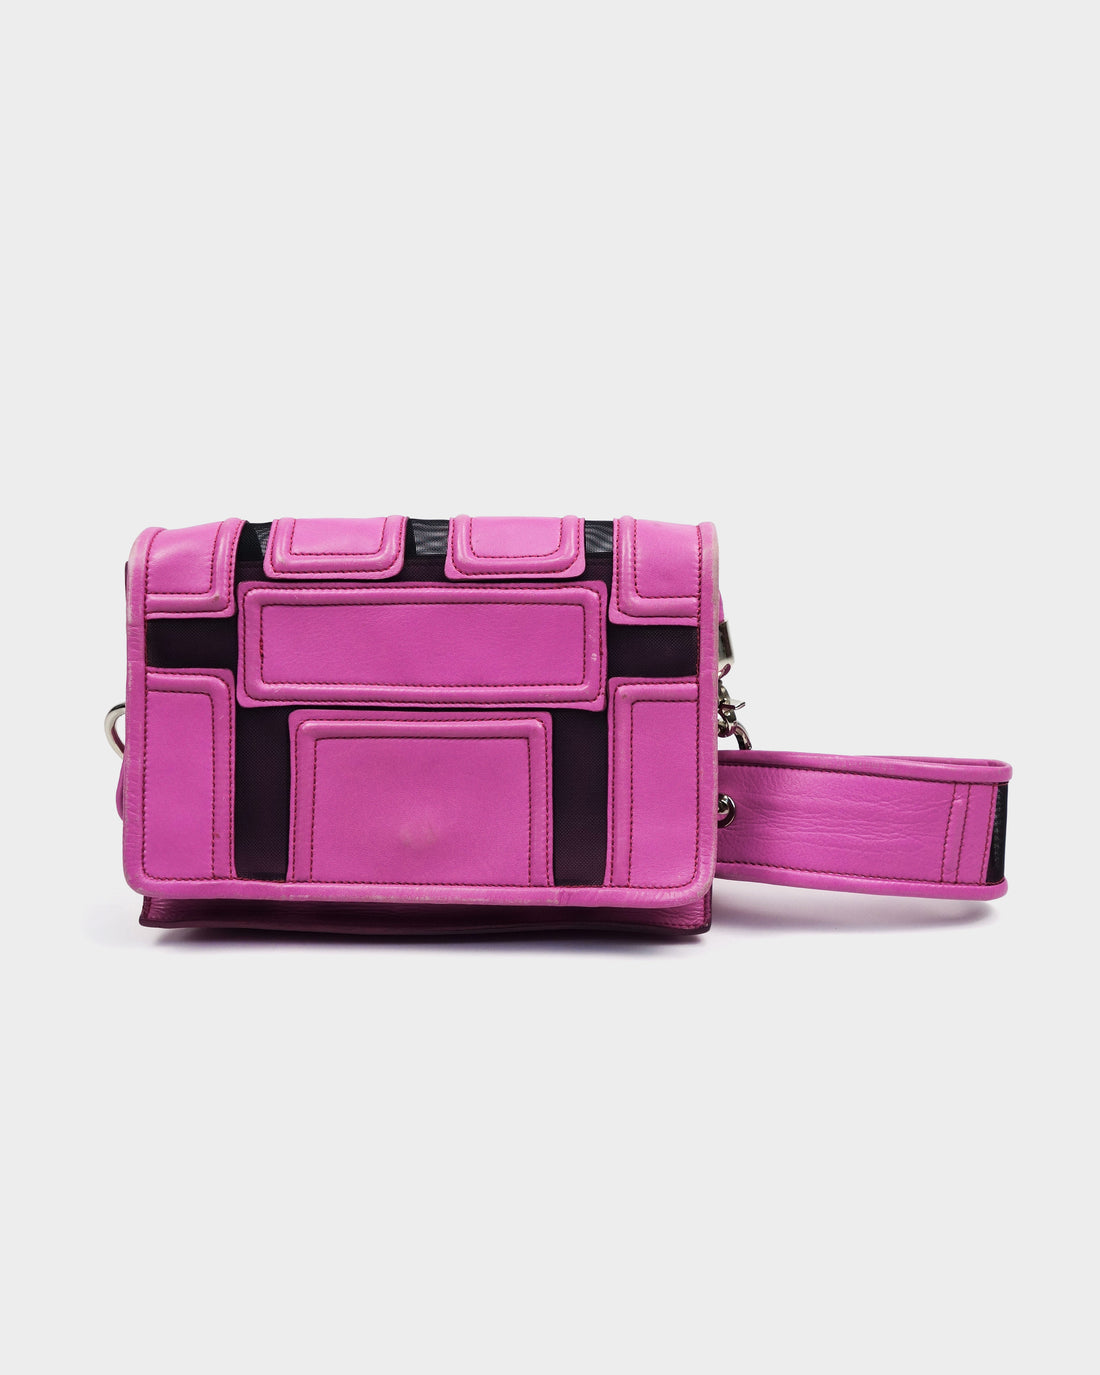 Versace Pink Squares Leather Bag 2000's